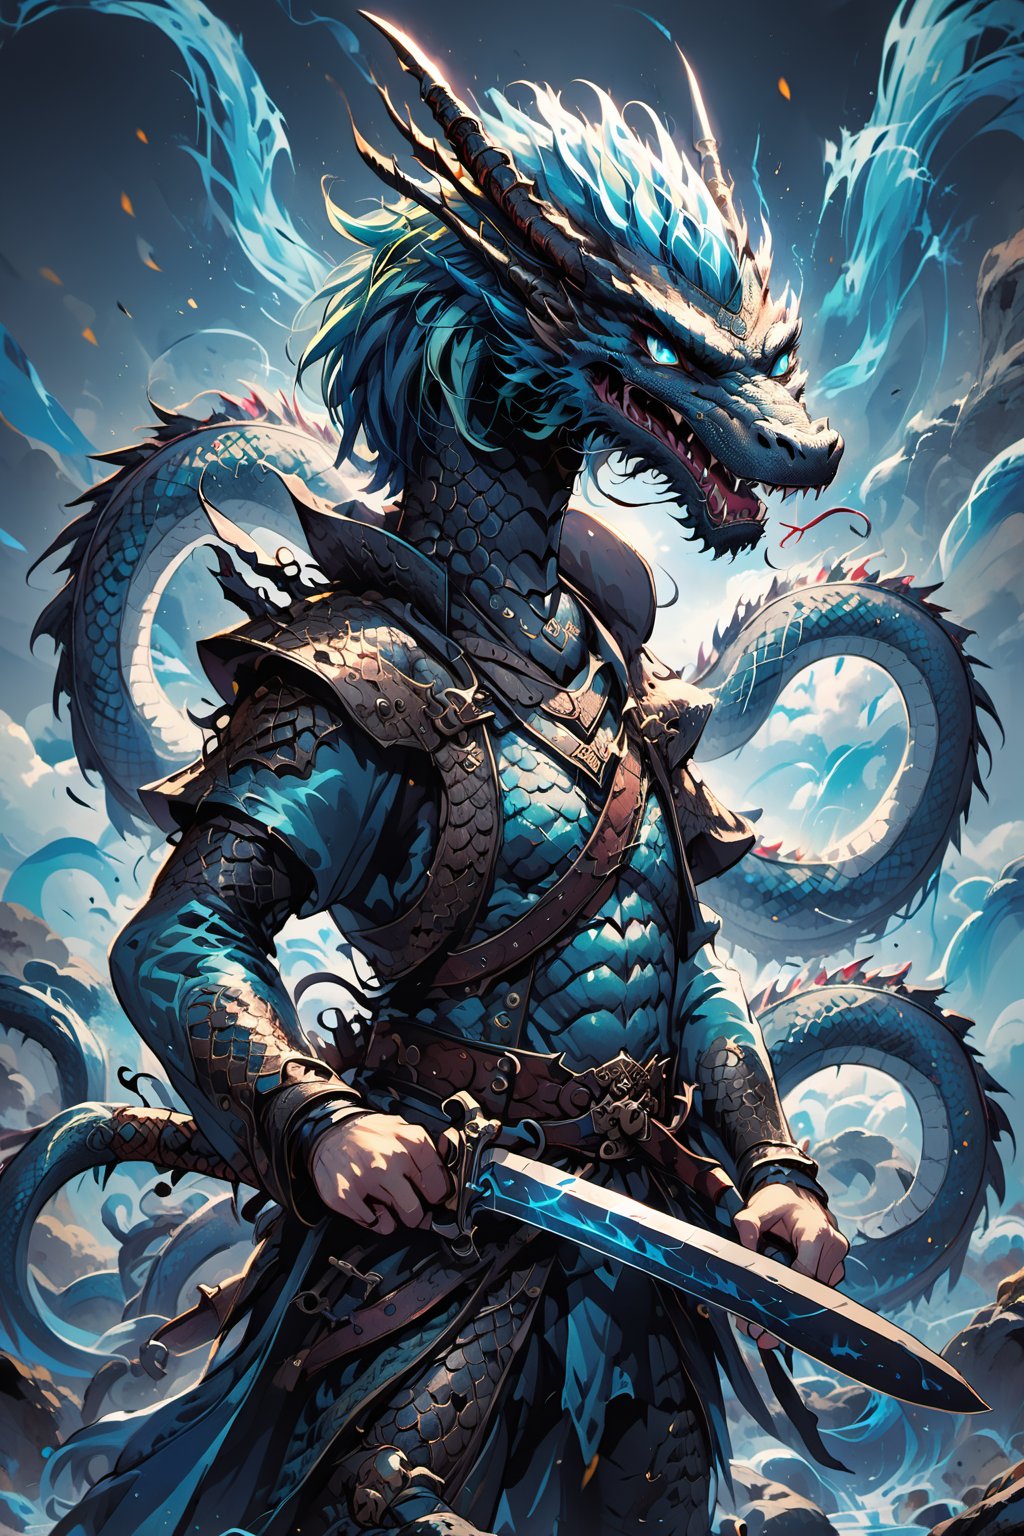 There is a blue-haired man holding a katana, holding a knife in his mouth, wearing broken armor, and carrying a gun on his back. The man has a short haircut, and a giant dragon with white body and dense scales. The dragon has clear aqua blue eyes. eye, man looking in the air